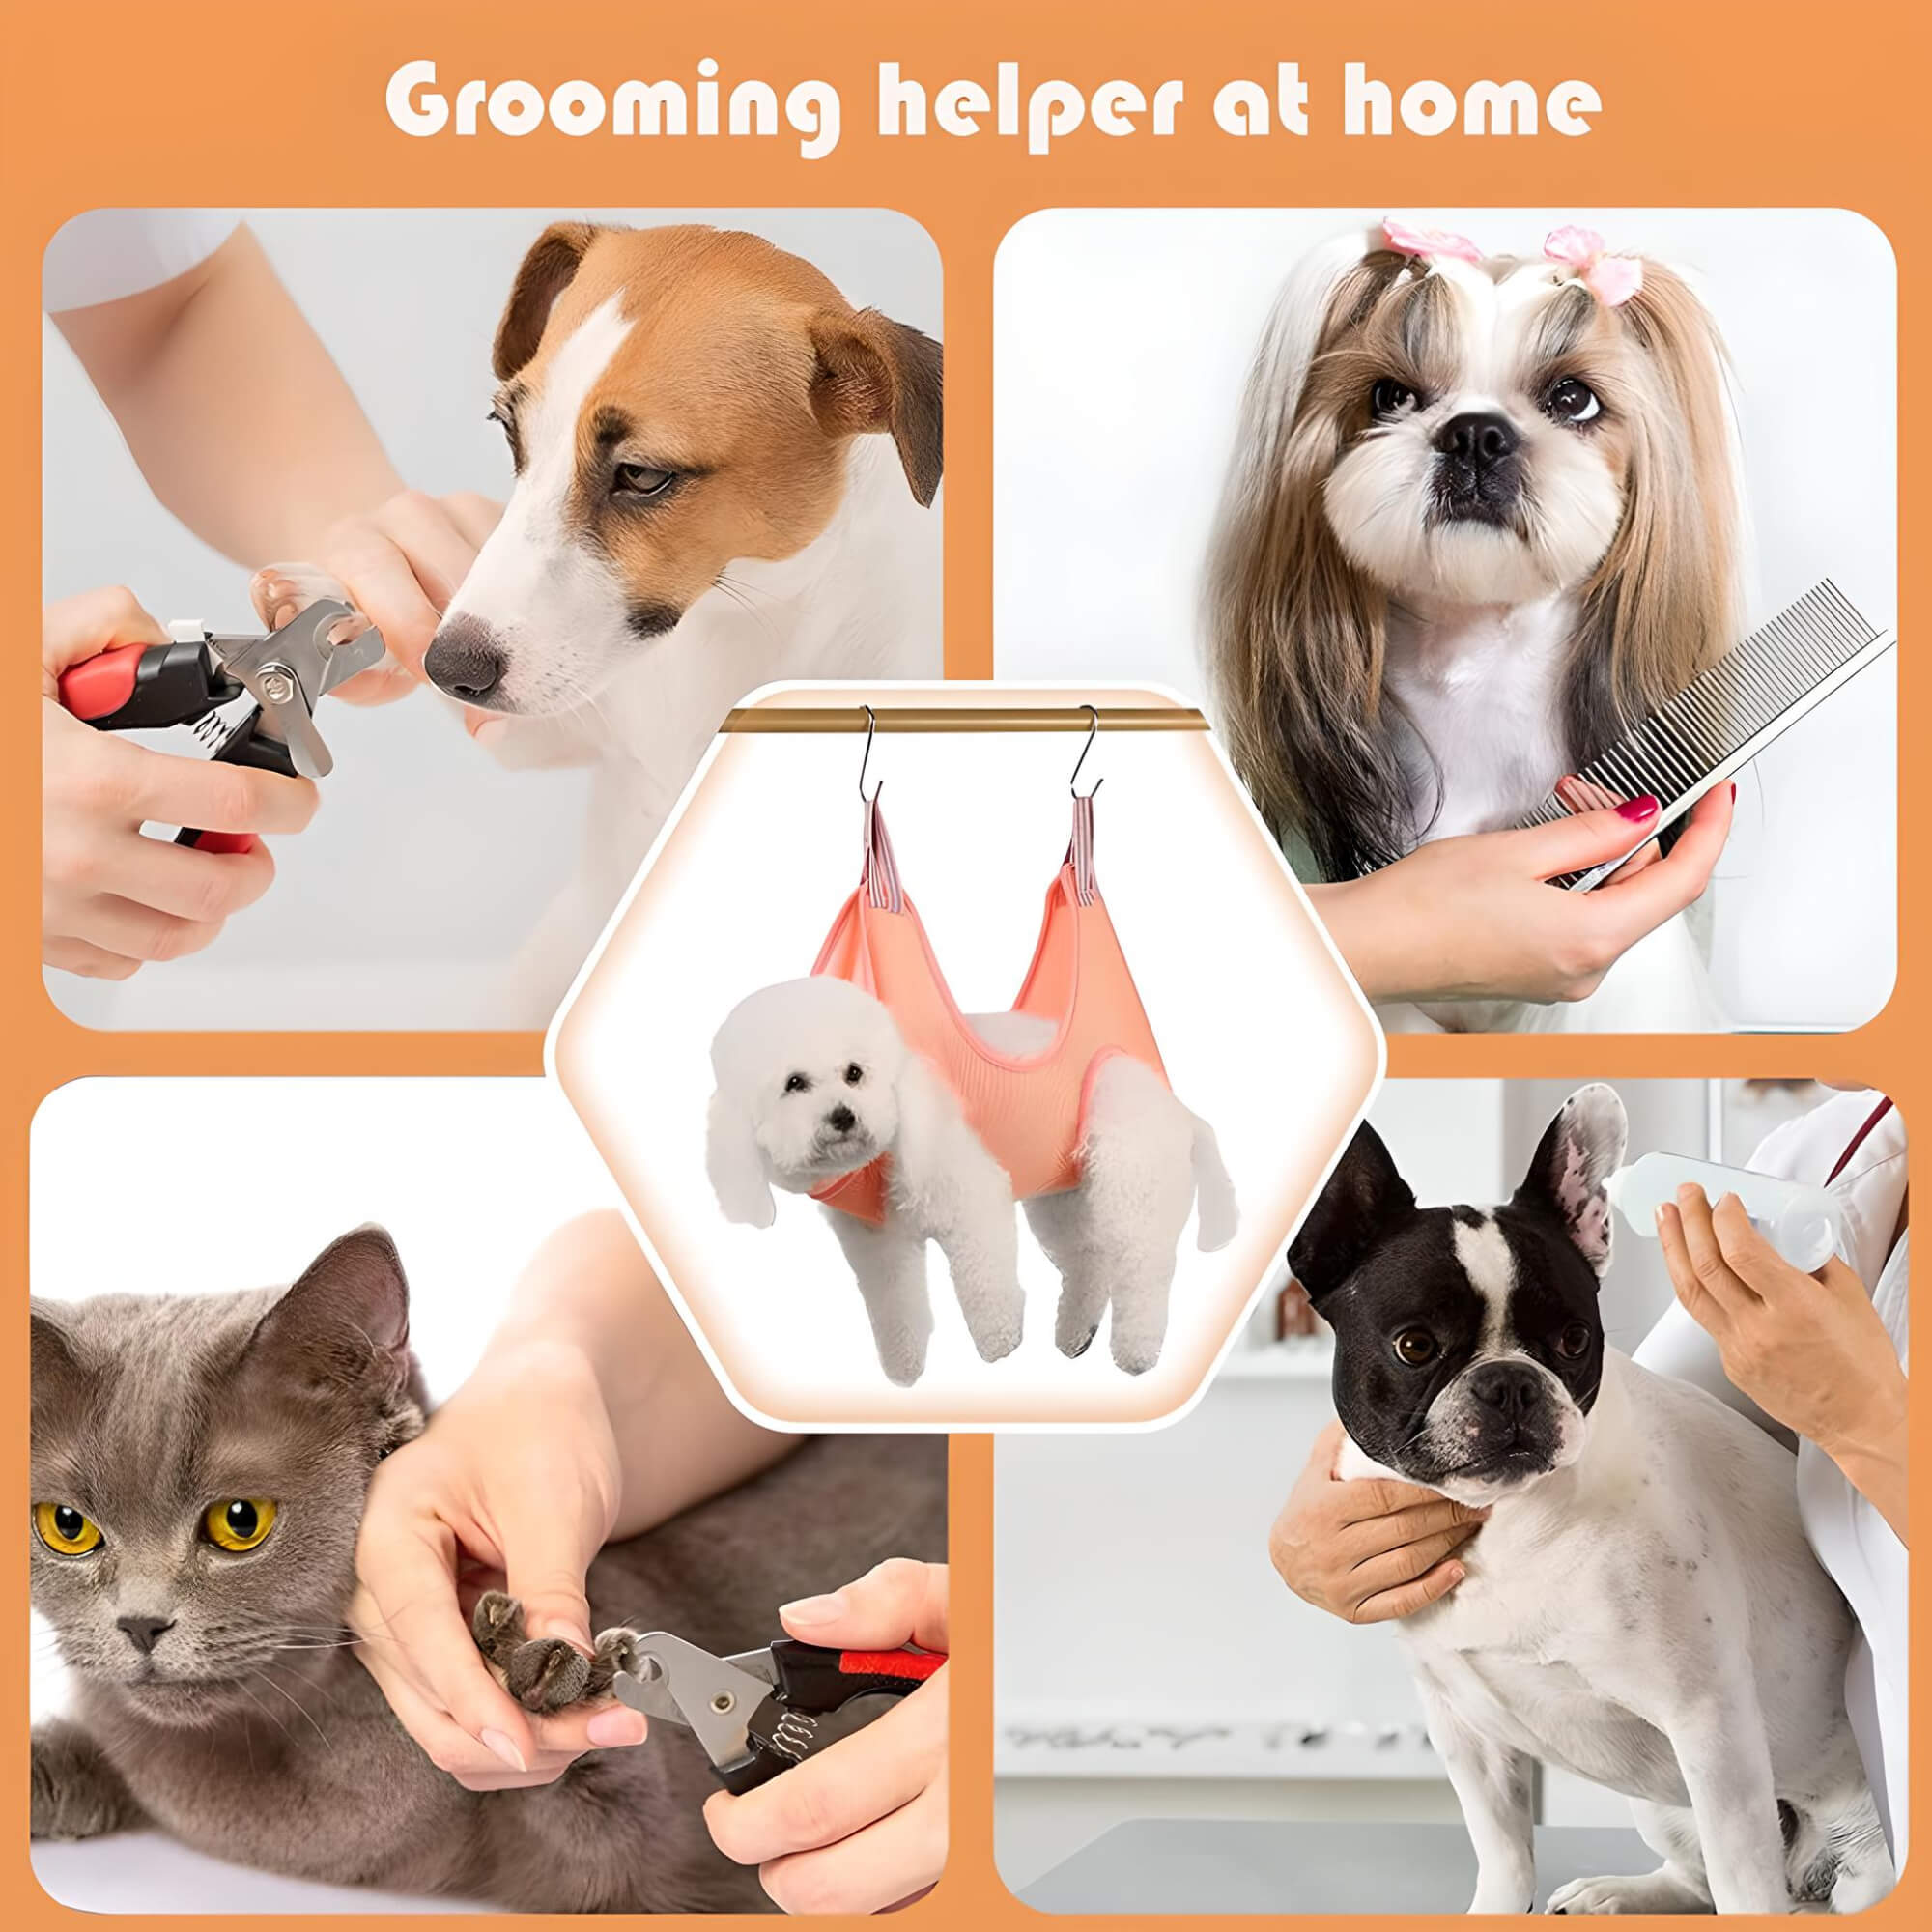 types-of-work-done-by-dog-grooming-harness